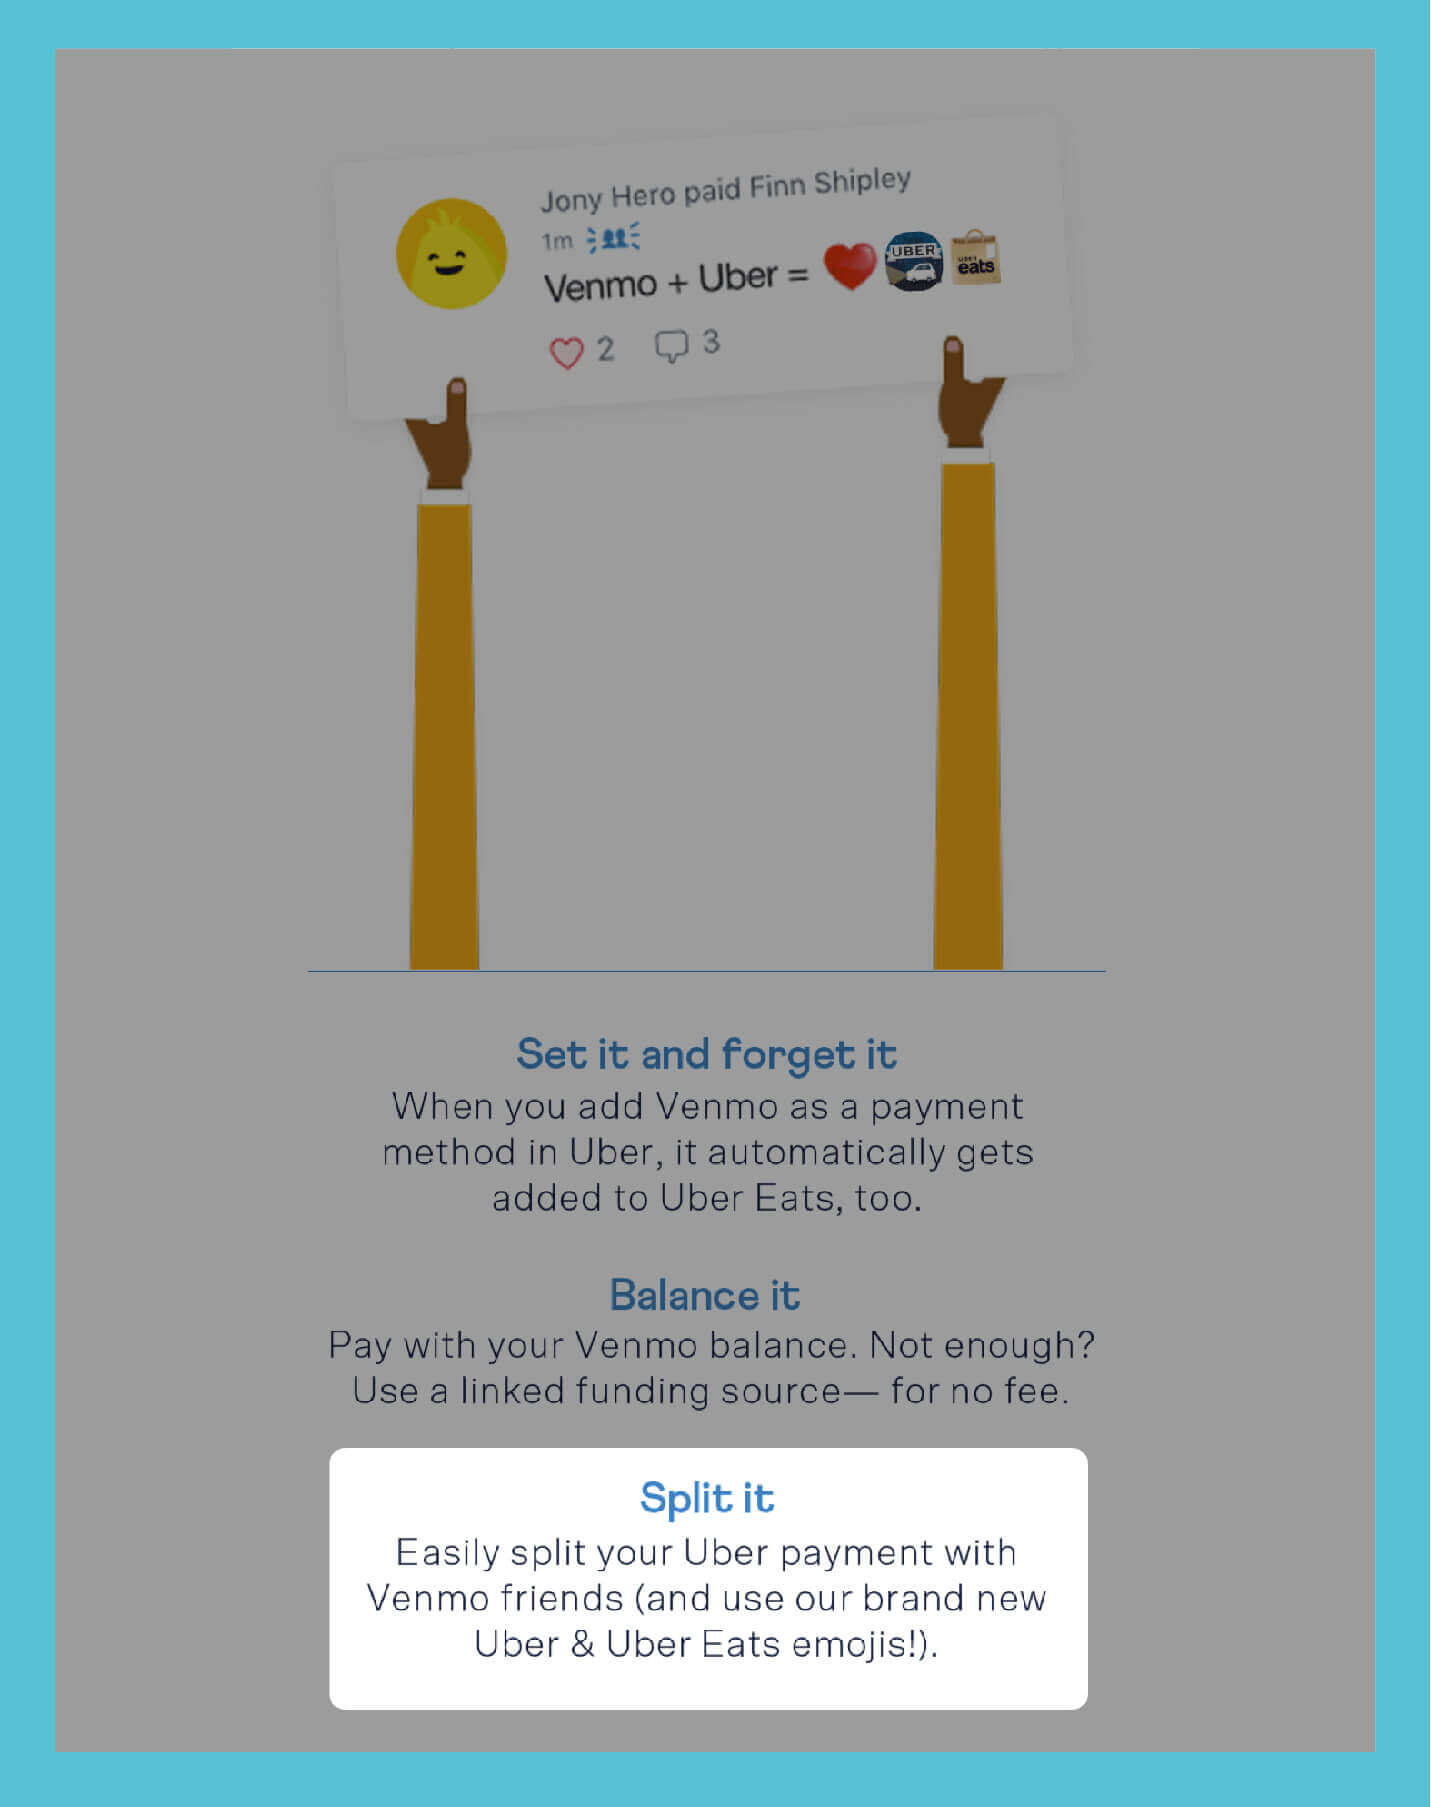 referral email examples from partnership with Uber and Venmo to pay friends and attract new users simultaneously